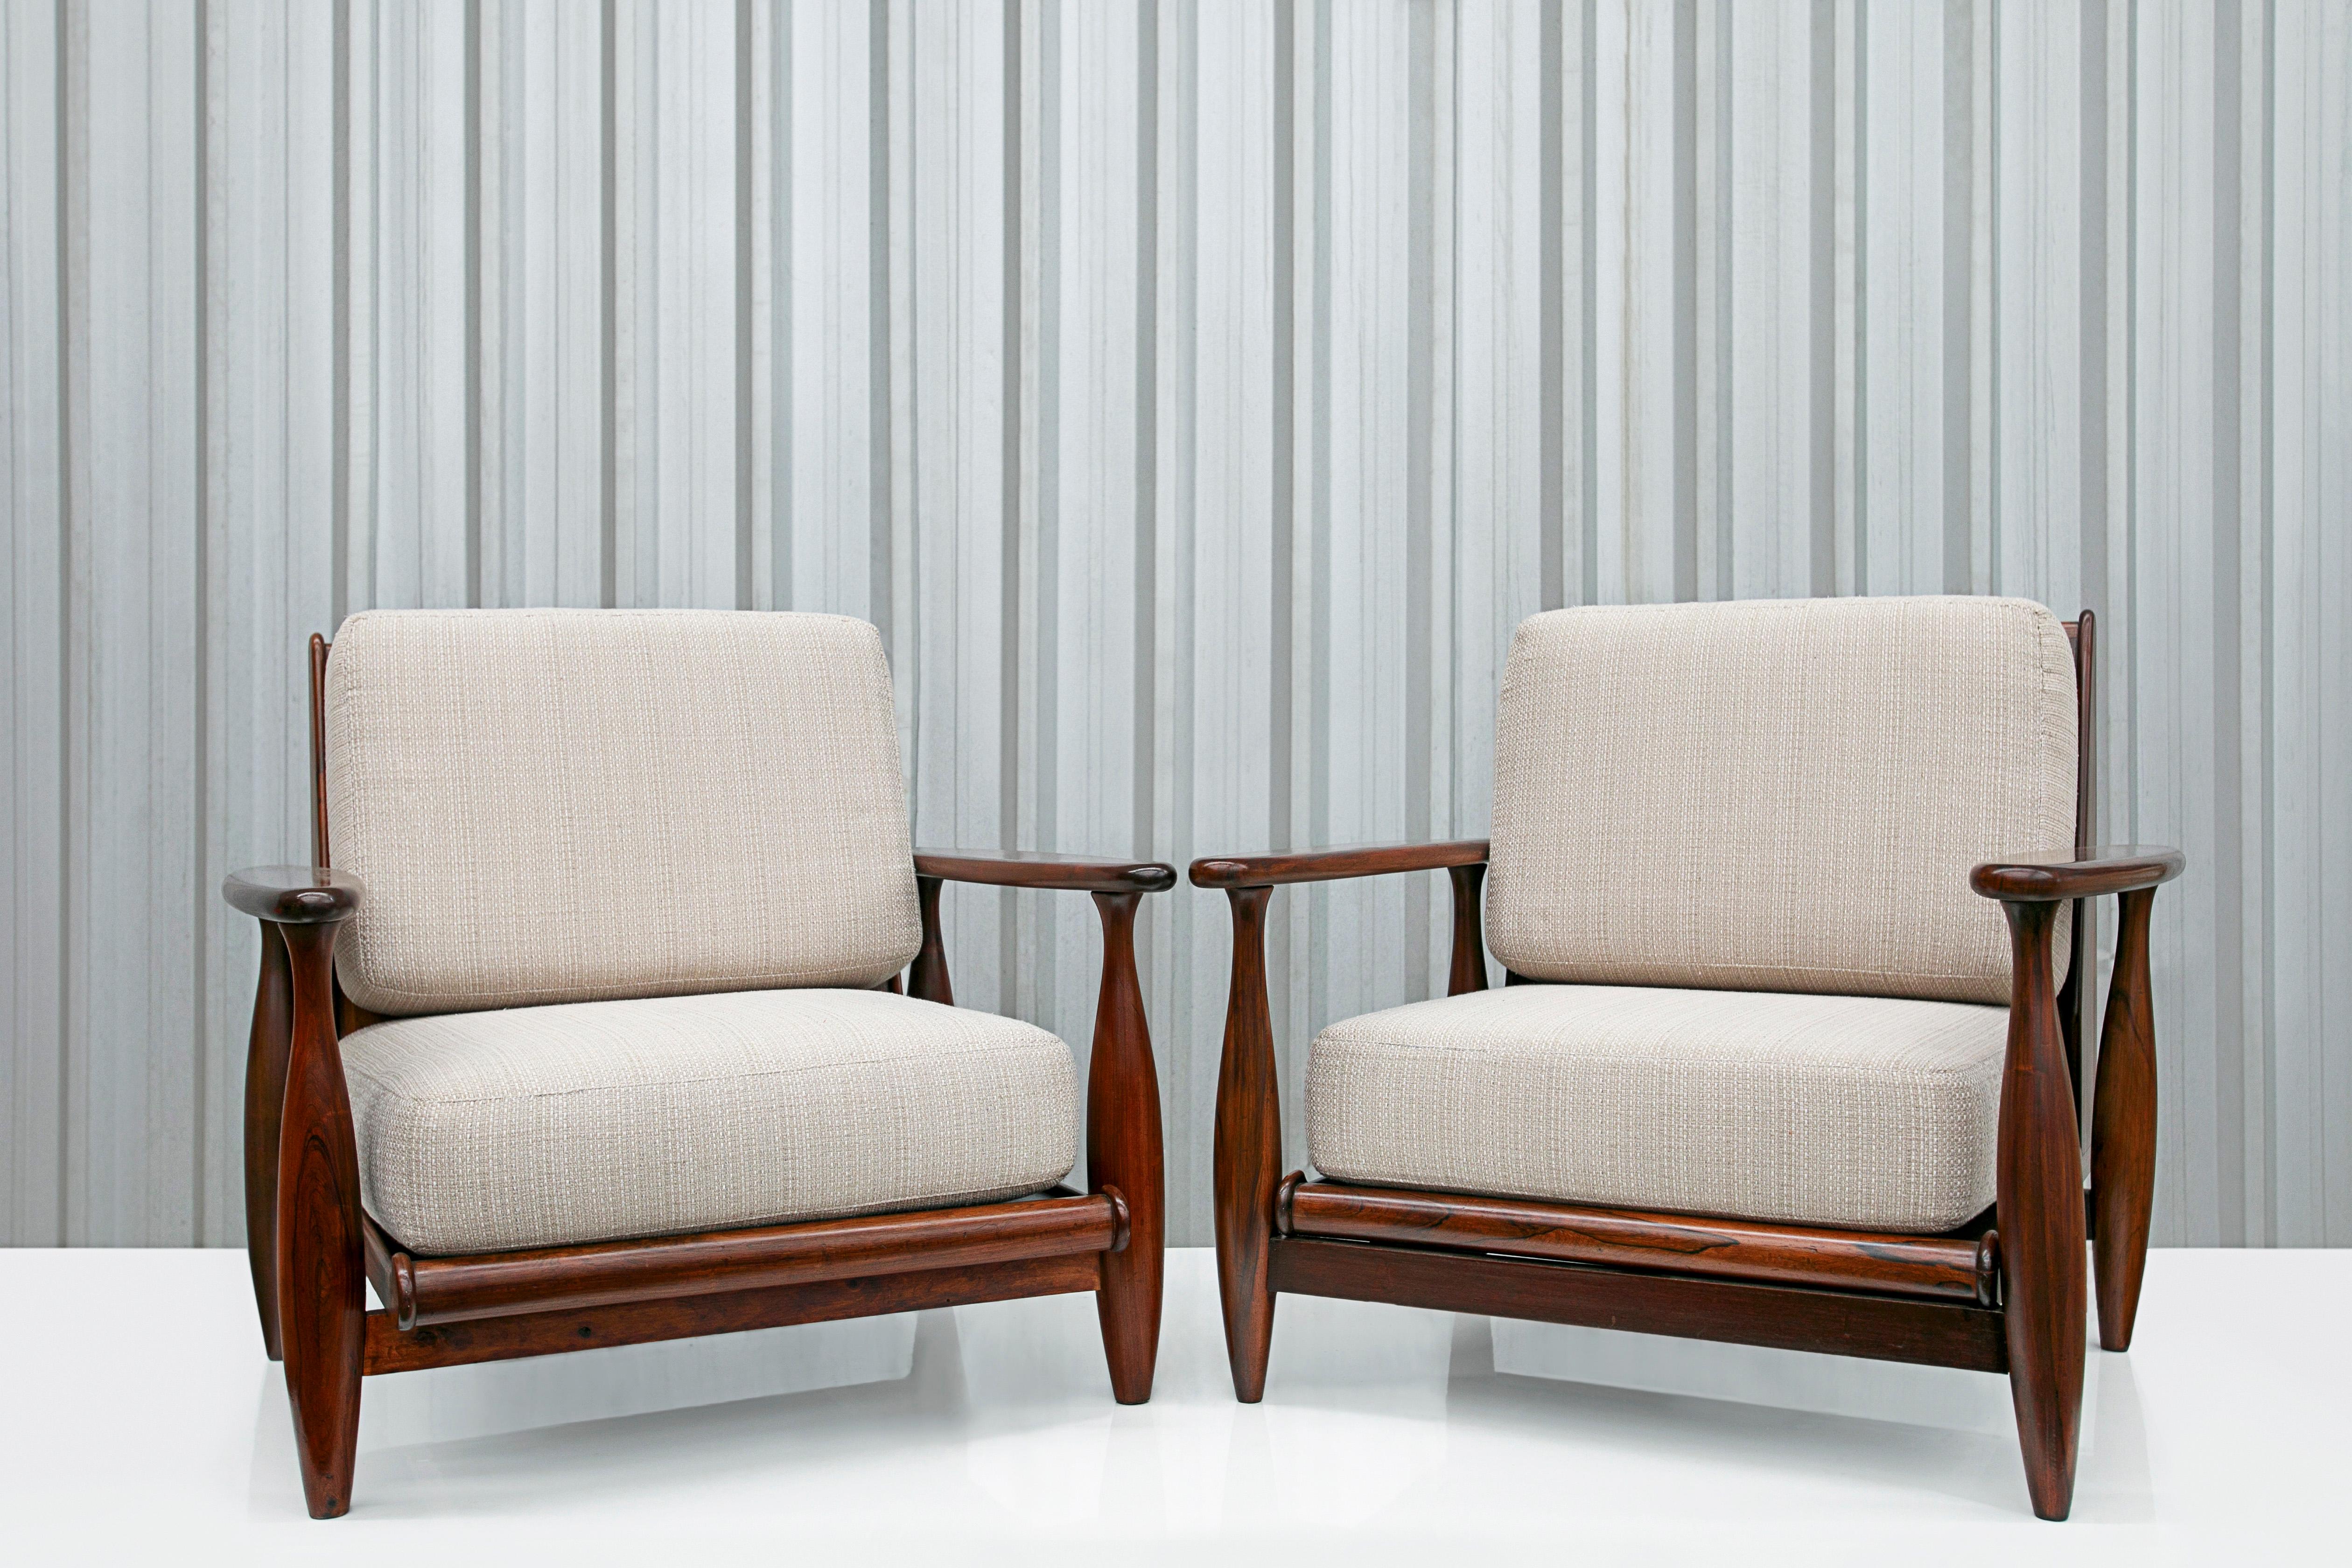 Available today, this spectacular Mid-Century Modern armchair set in hardwood & beige cotton fabric designed by Liceu de Artes e Oficios, in the sixties, is nothing less than spectacular.

These impressive armchairs are made in Brazilian Rosewood,